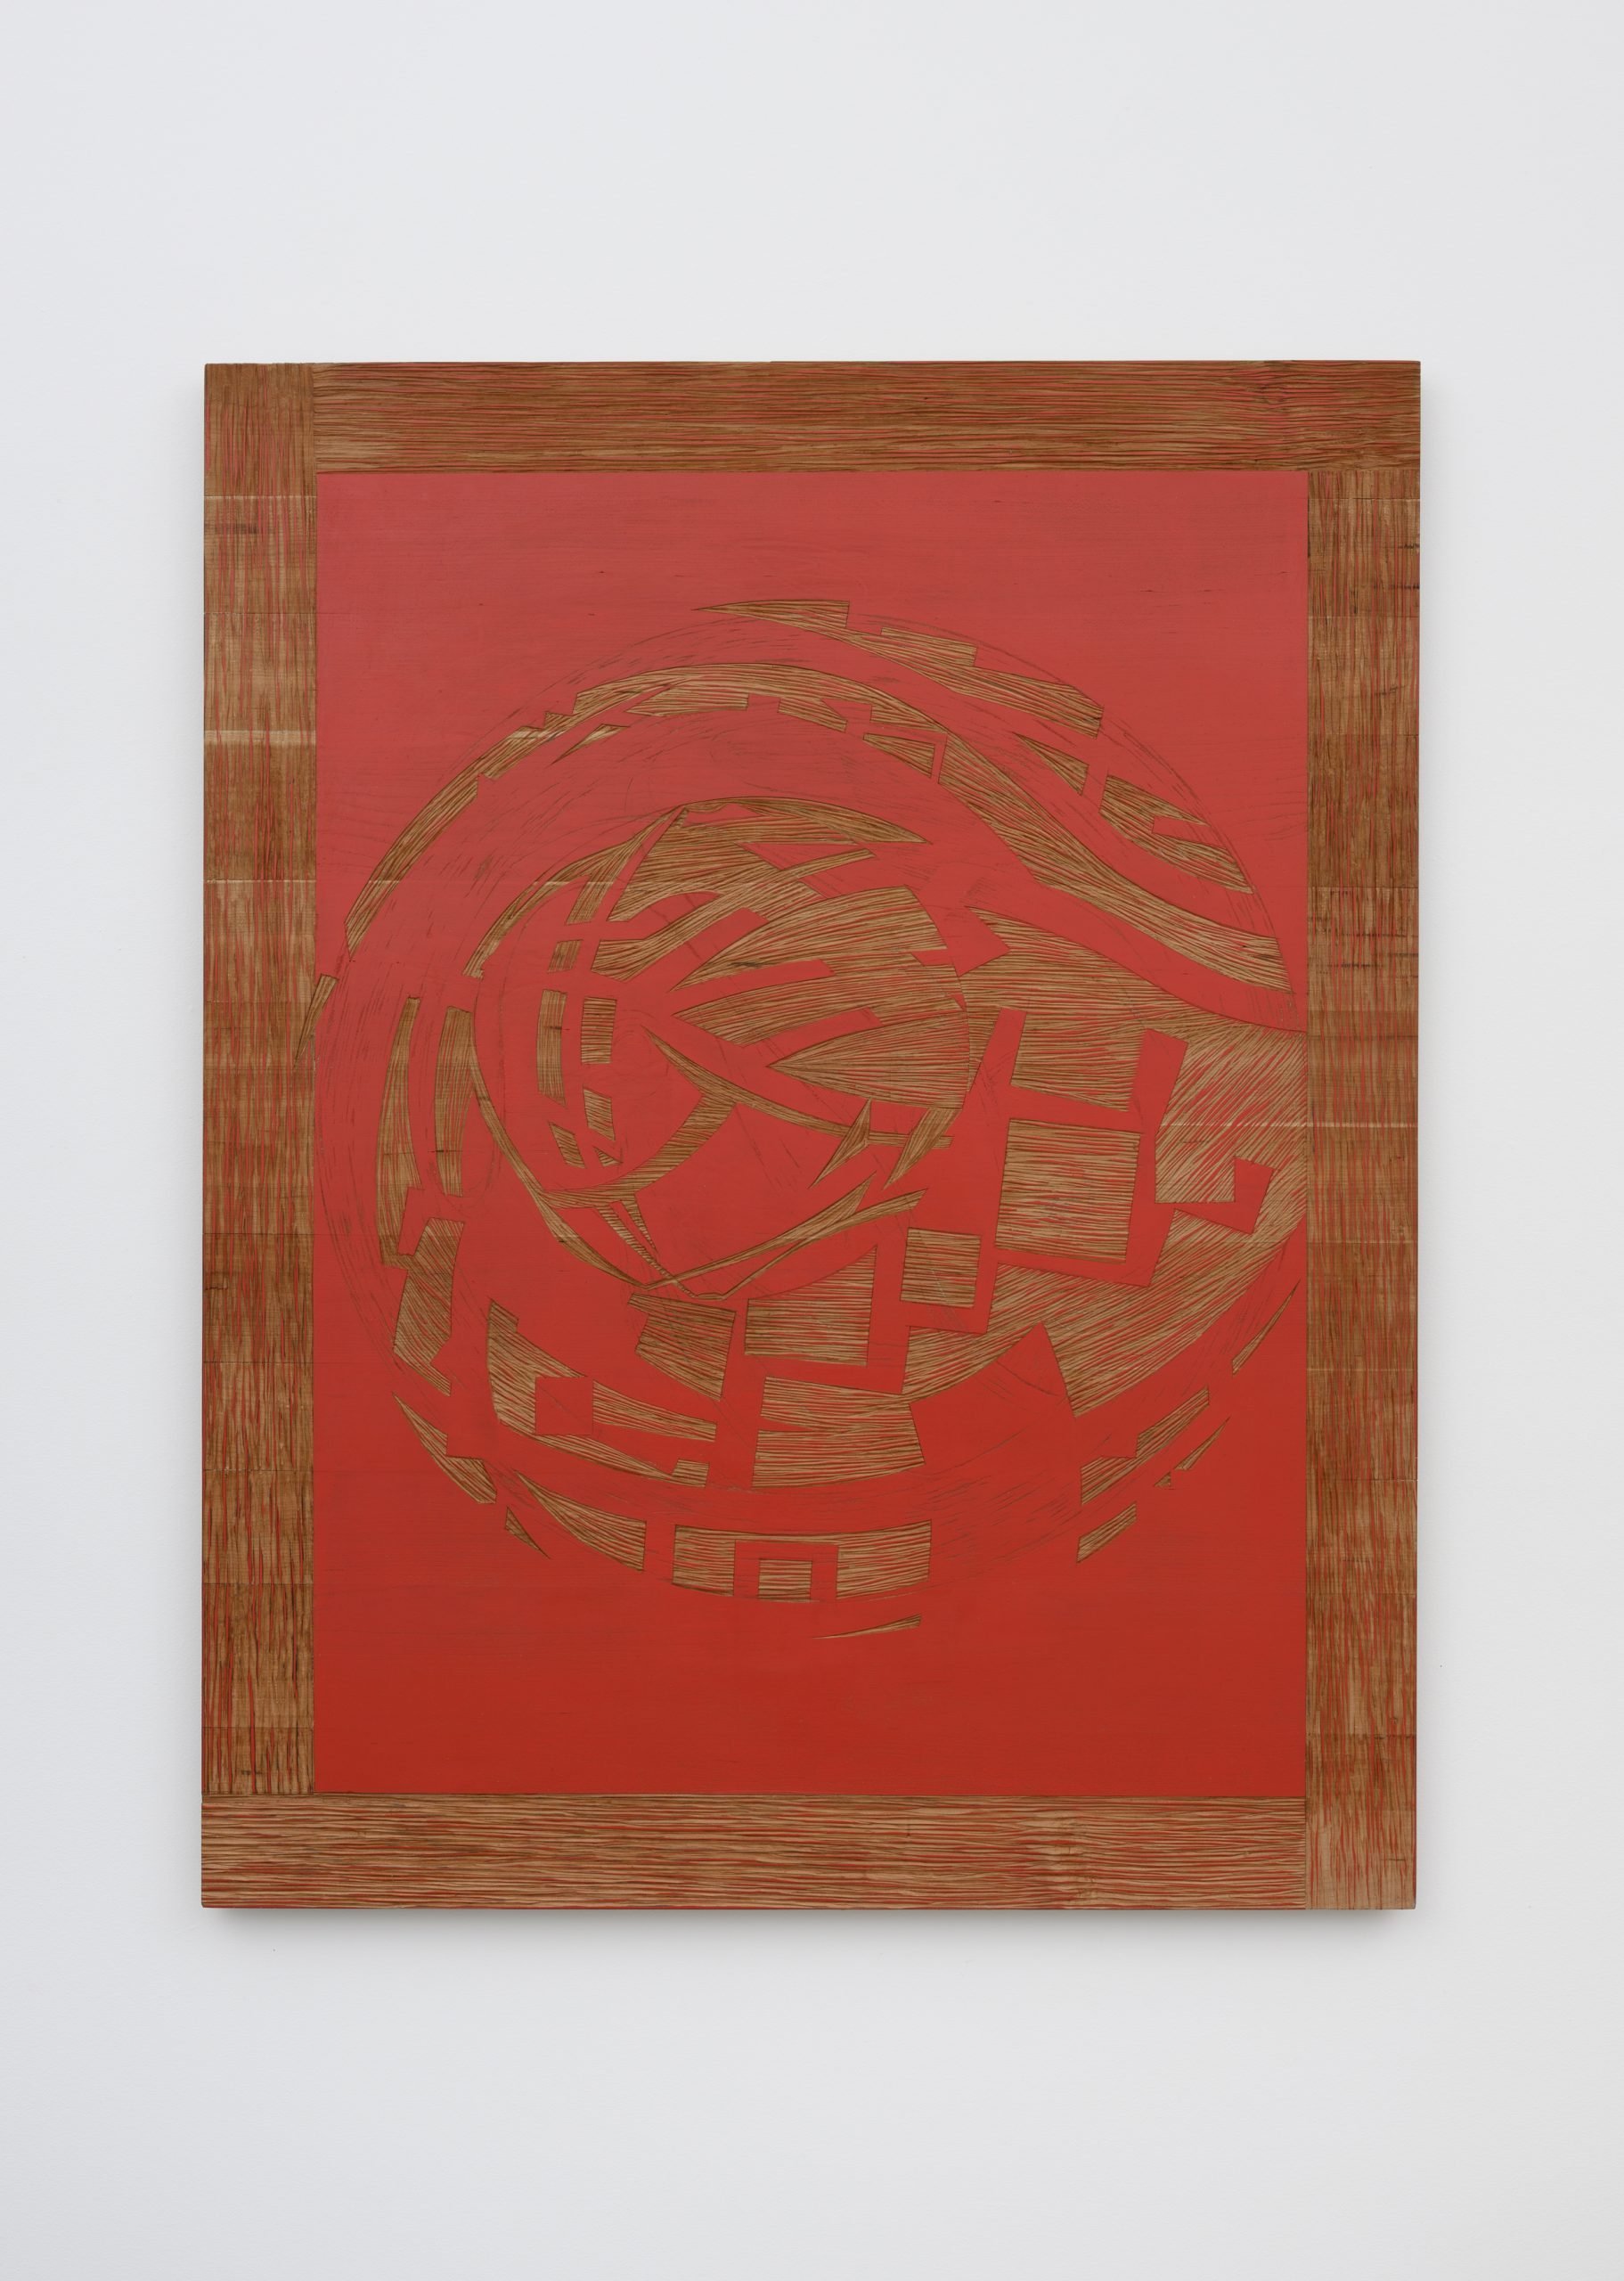 Domenico Bianchi, Untitled, 2021, red pigment (oil) on wood, Photography by Peter Cox, Eindhoven